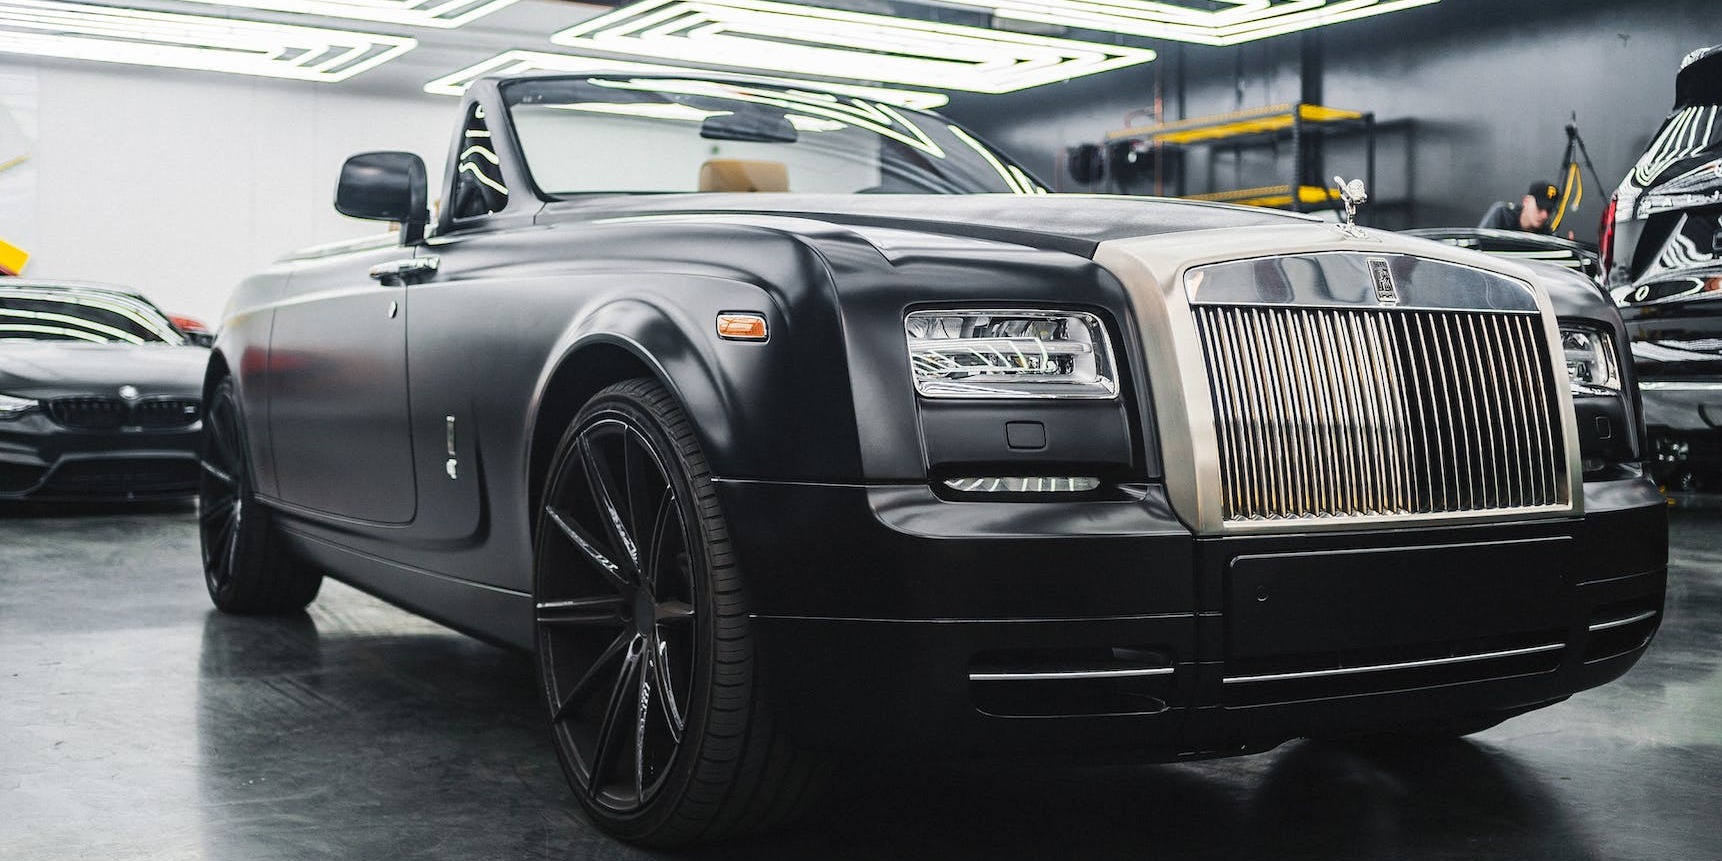 How to Hire a Rolls Royce for Your Prom Night in Central London